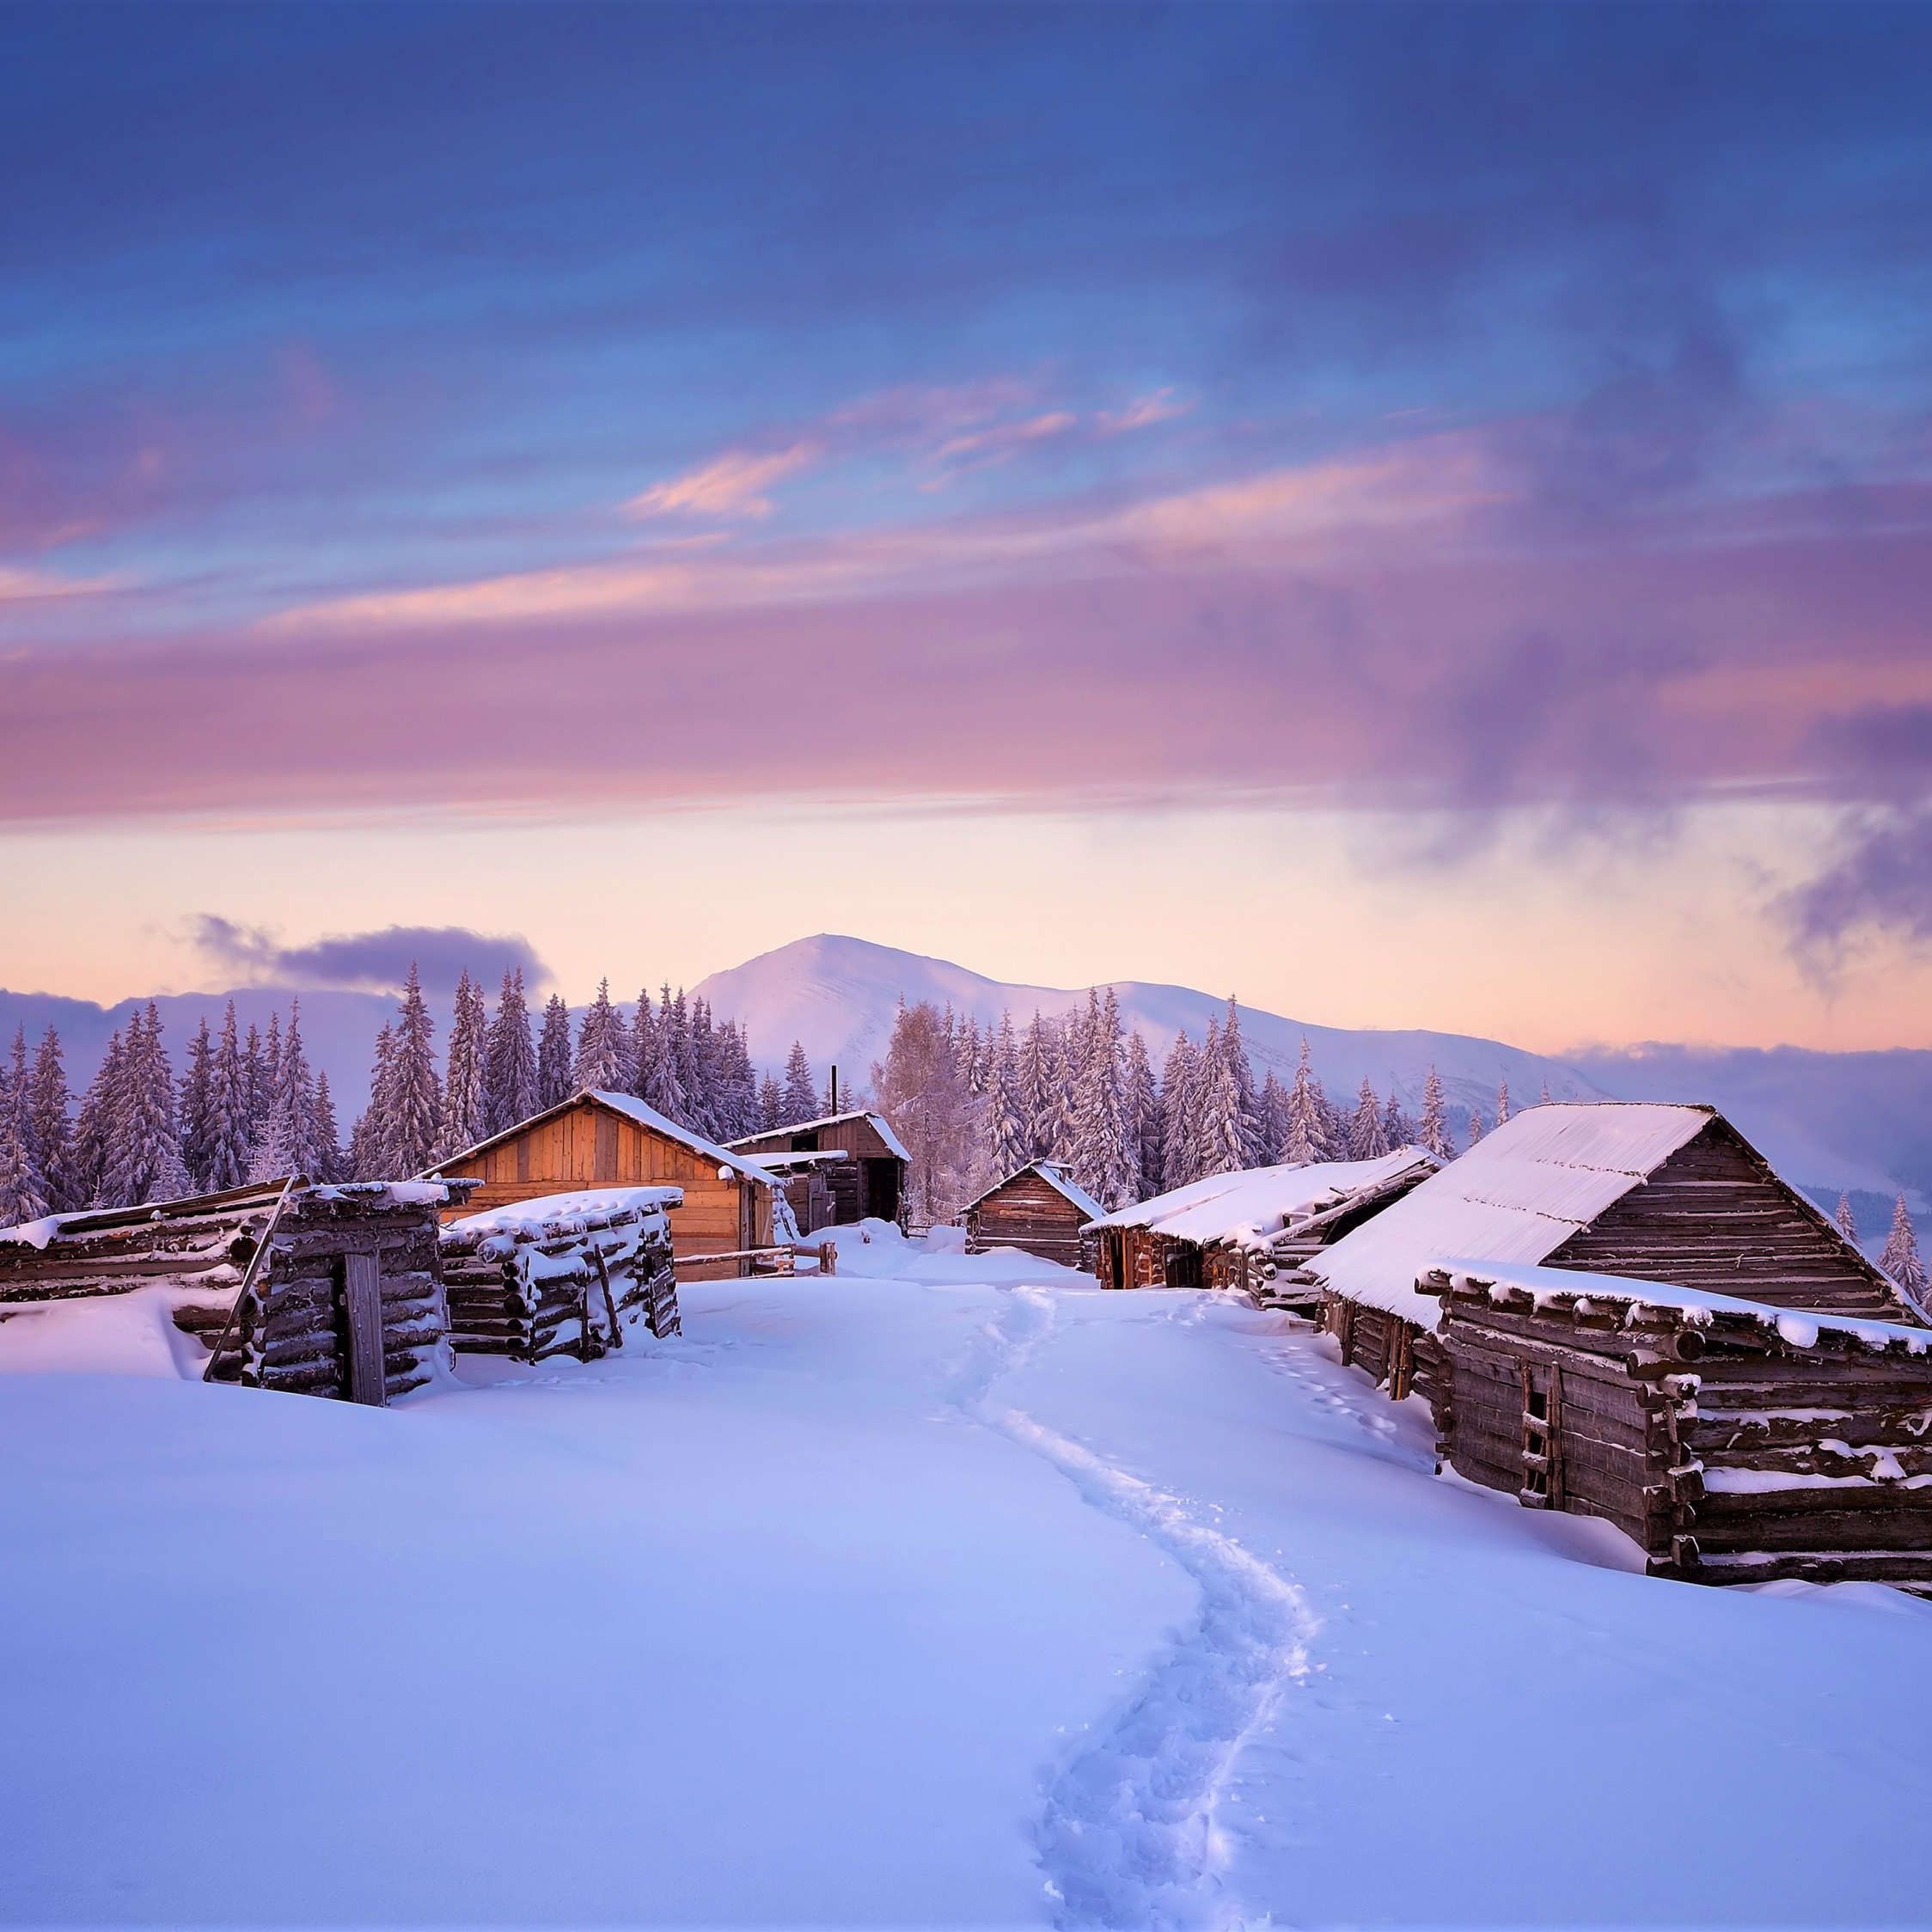 Download houses, winter, landscape, sunset 2248x2248 wallpaper, ipad air, ipad air ipad ipad ipad mini ipad mini 2248x2248 HD image, background, 1086